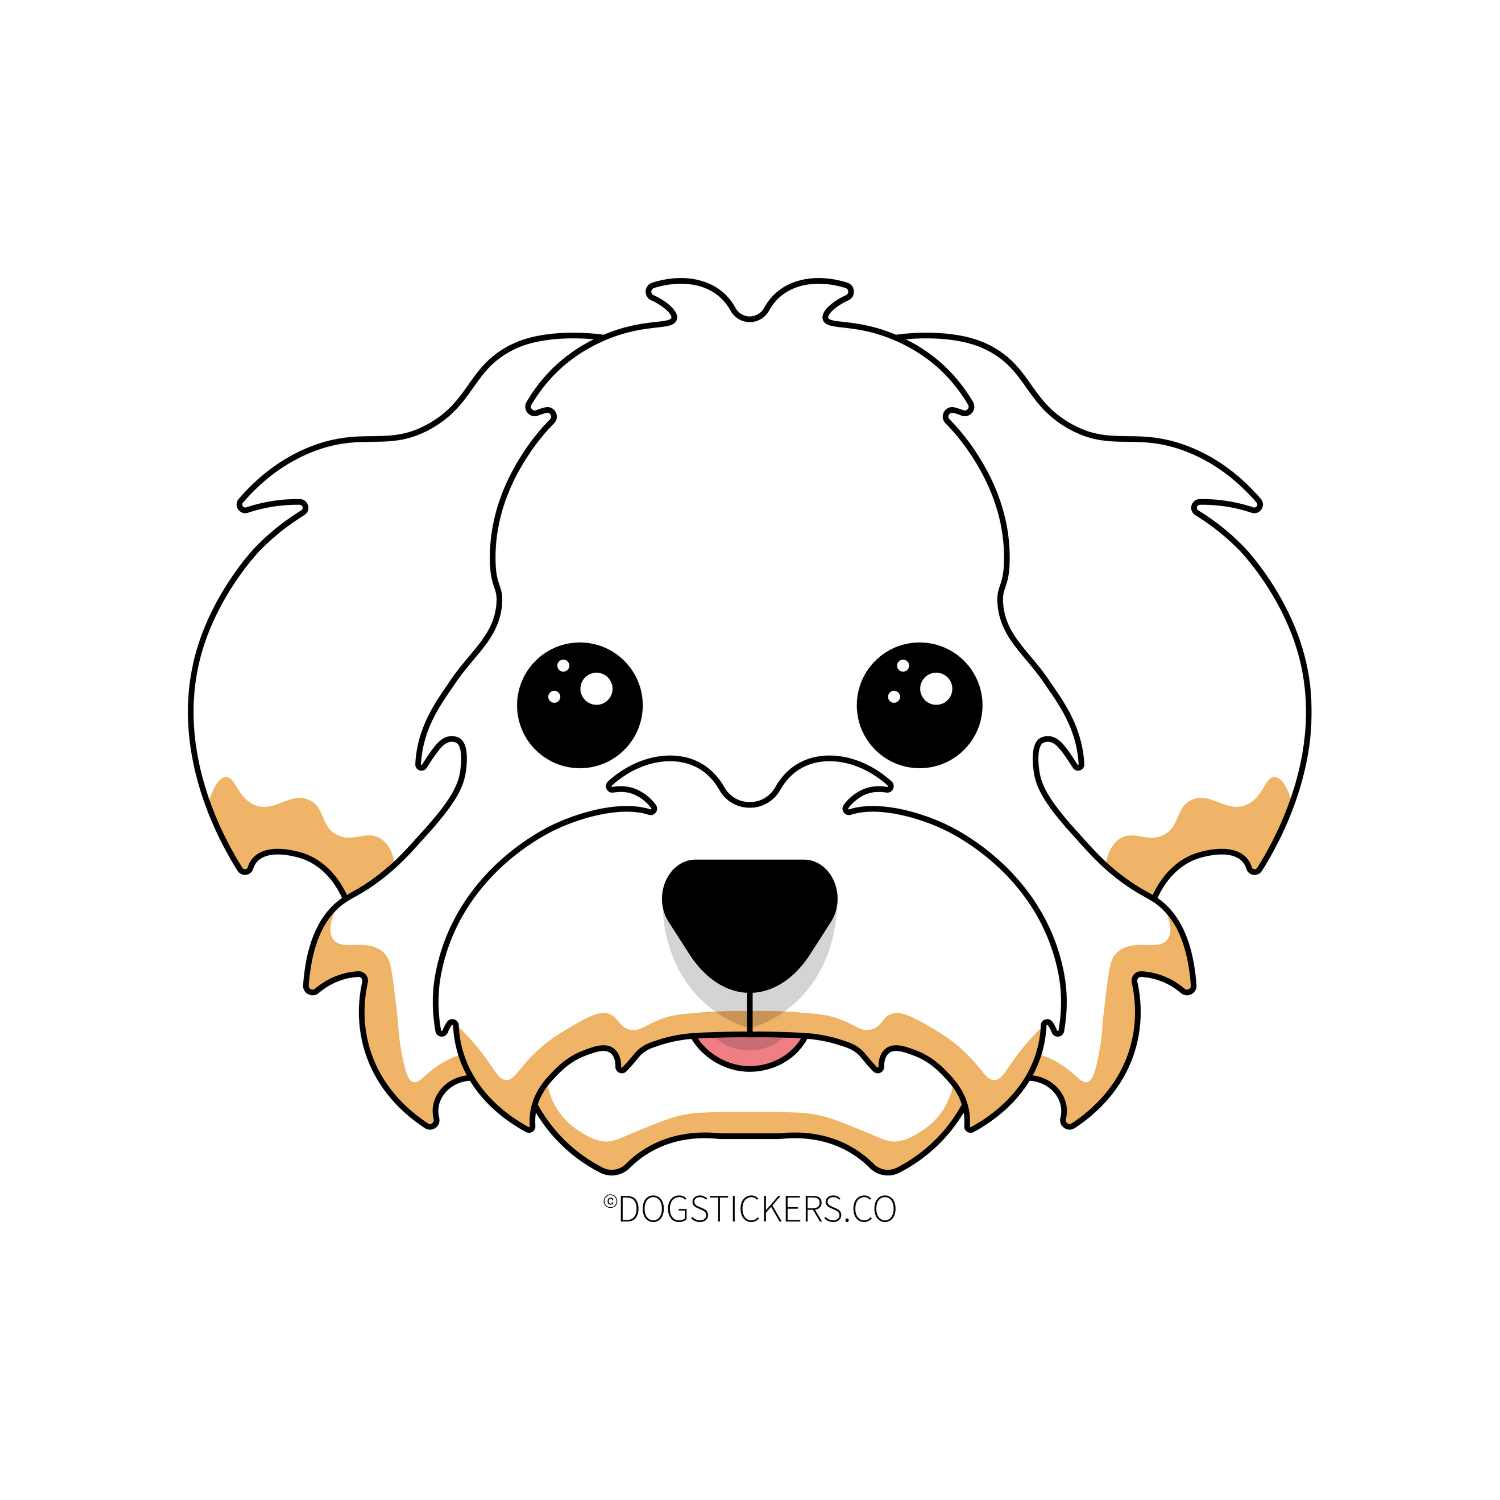 Schnoodle - Dogstickers.co